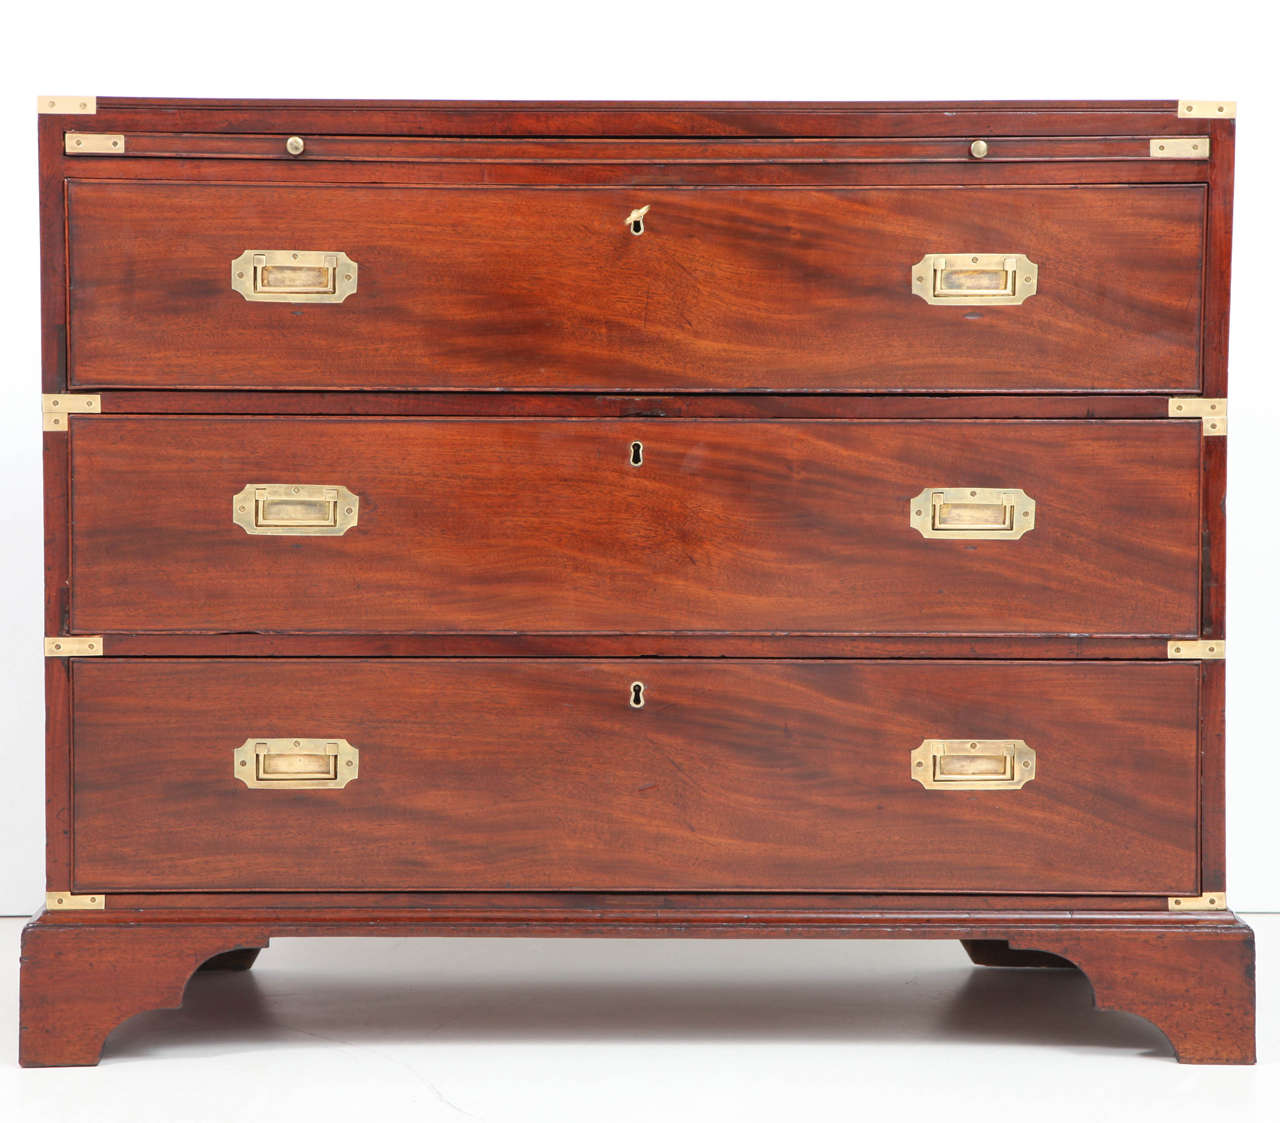 An English brass mounted mahogany campaign chest of drawers, circa 1870s, in two parts with a slide out writing surface above three long drawers raised on bracket feet.